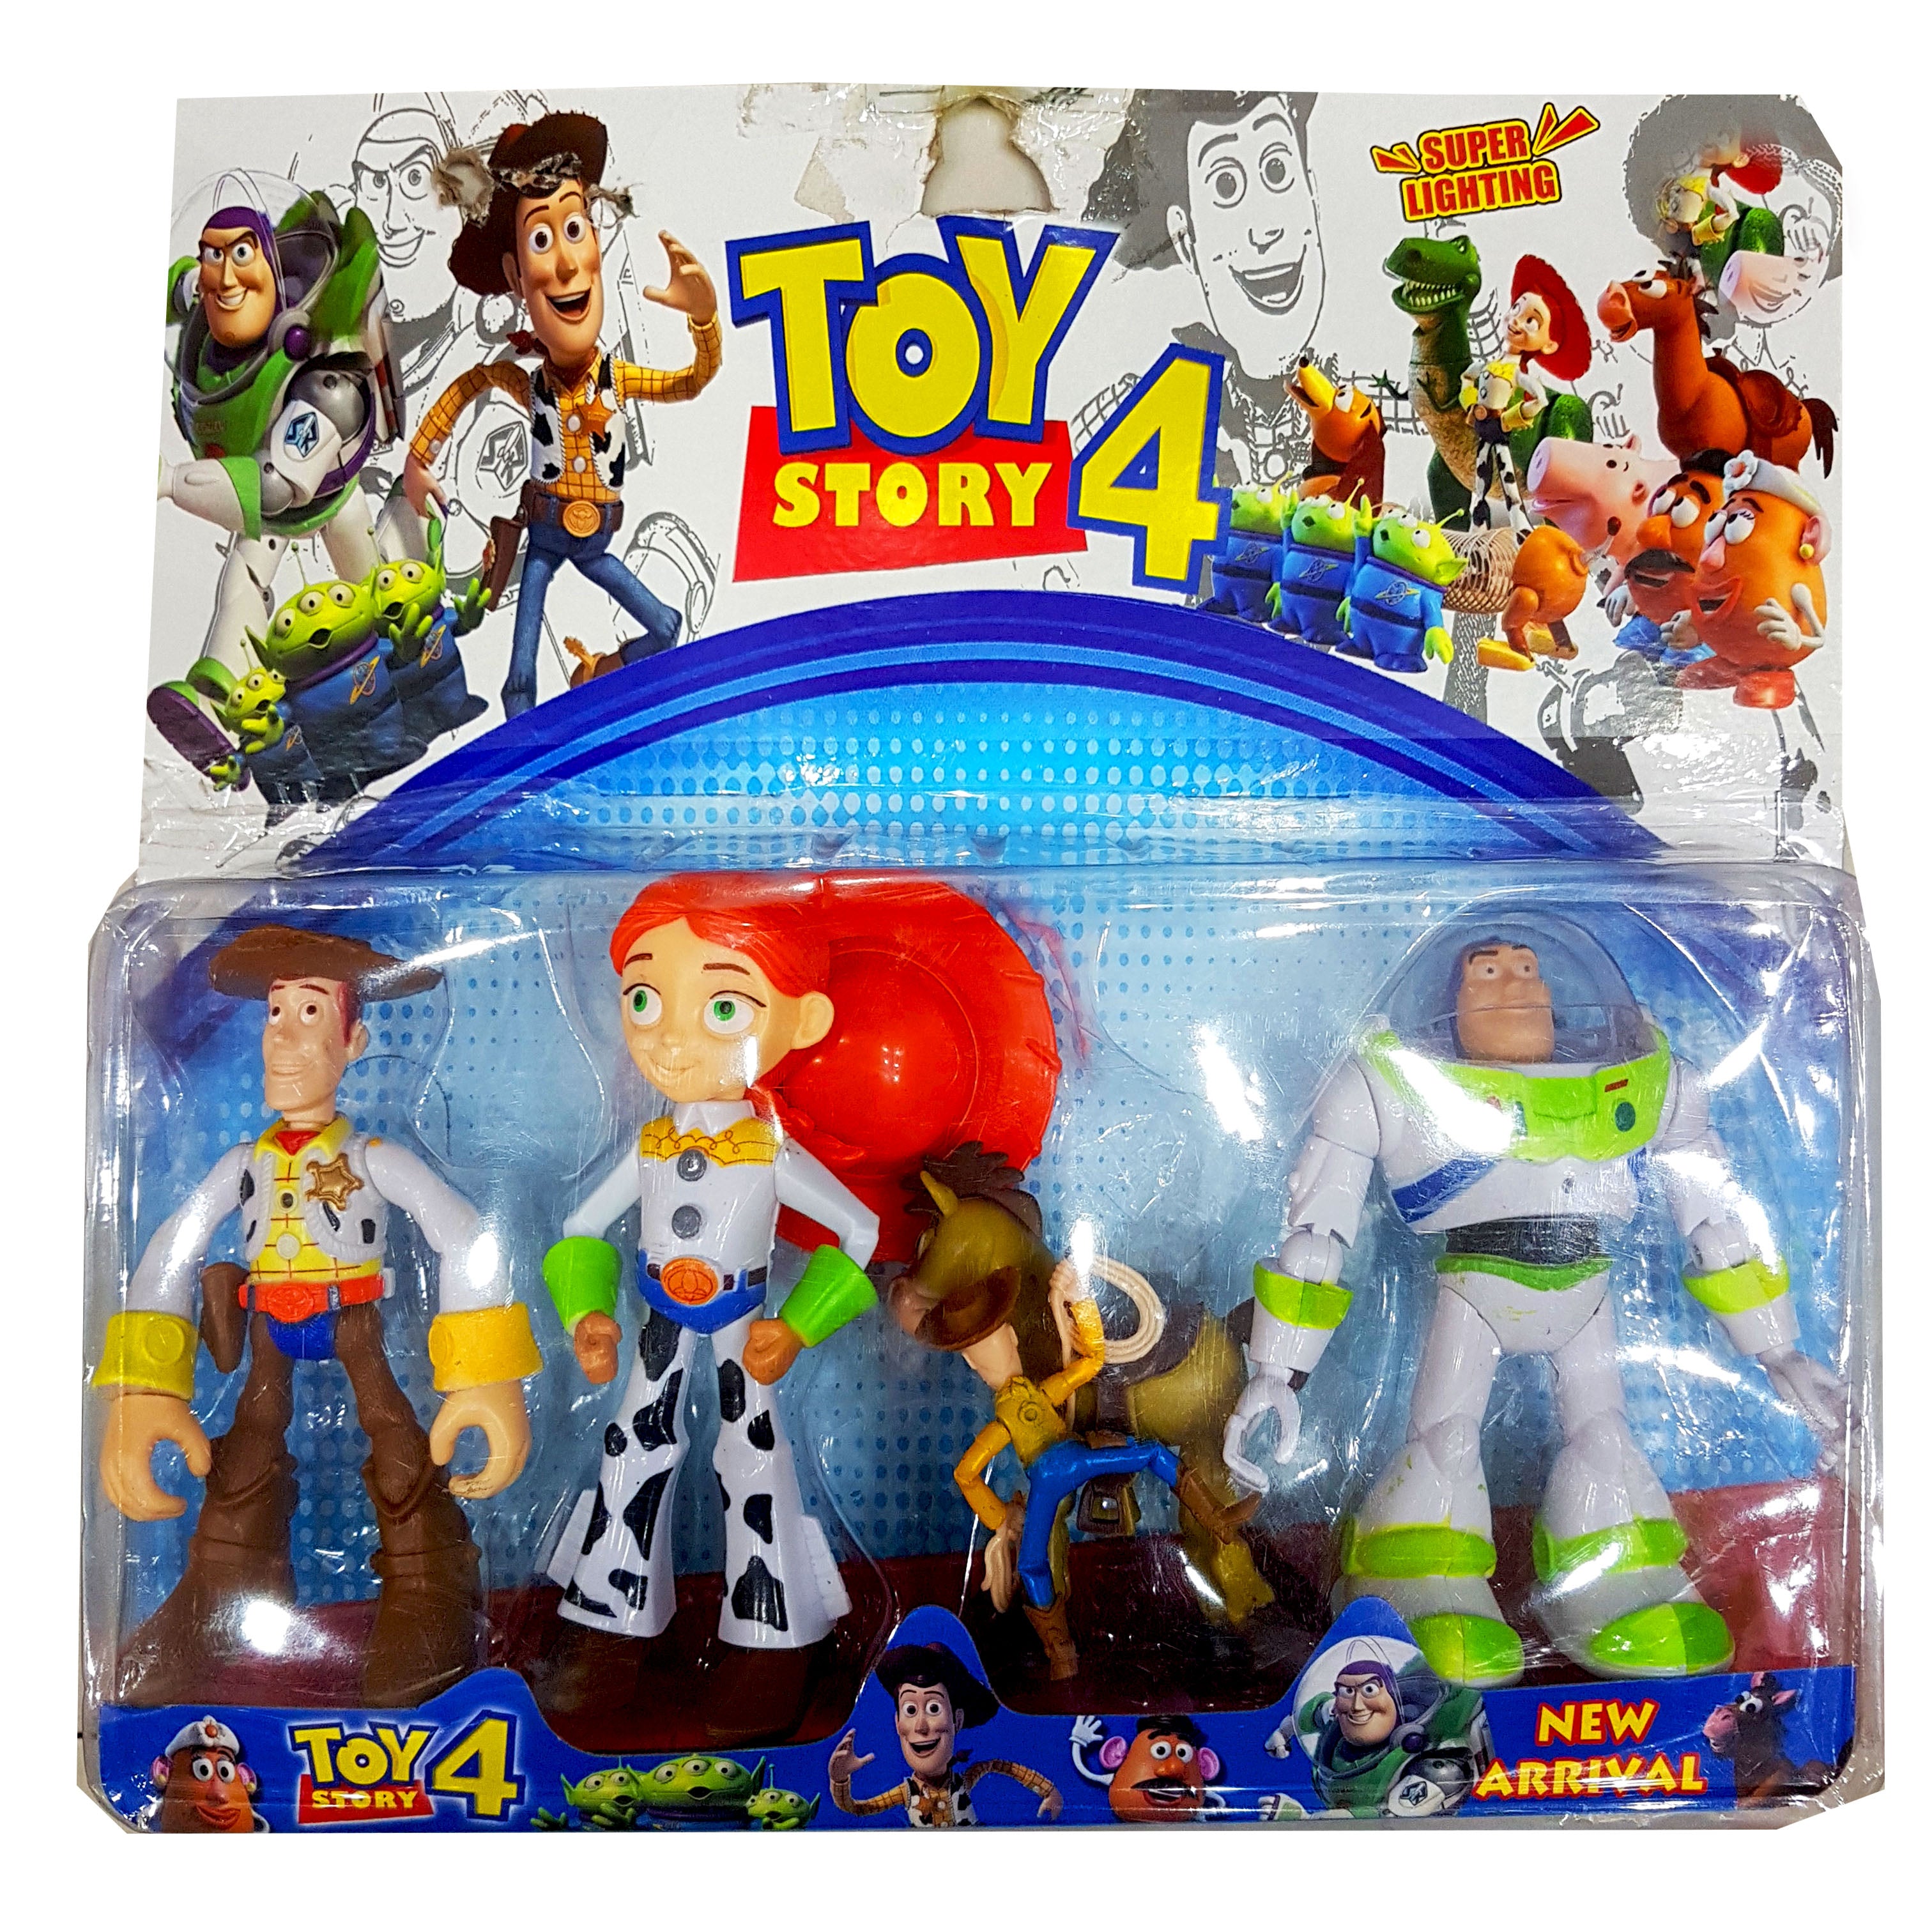 New Arrival Toy Story 4 Action Figure Set - 5-Piece Collector's Edition, Ideal Gift for Kids Ages 3 & Up and Toy Story Enthusiasts